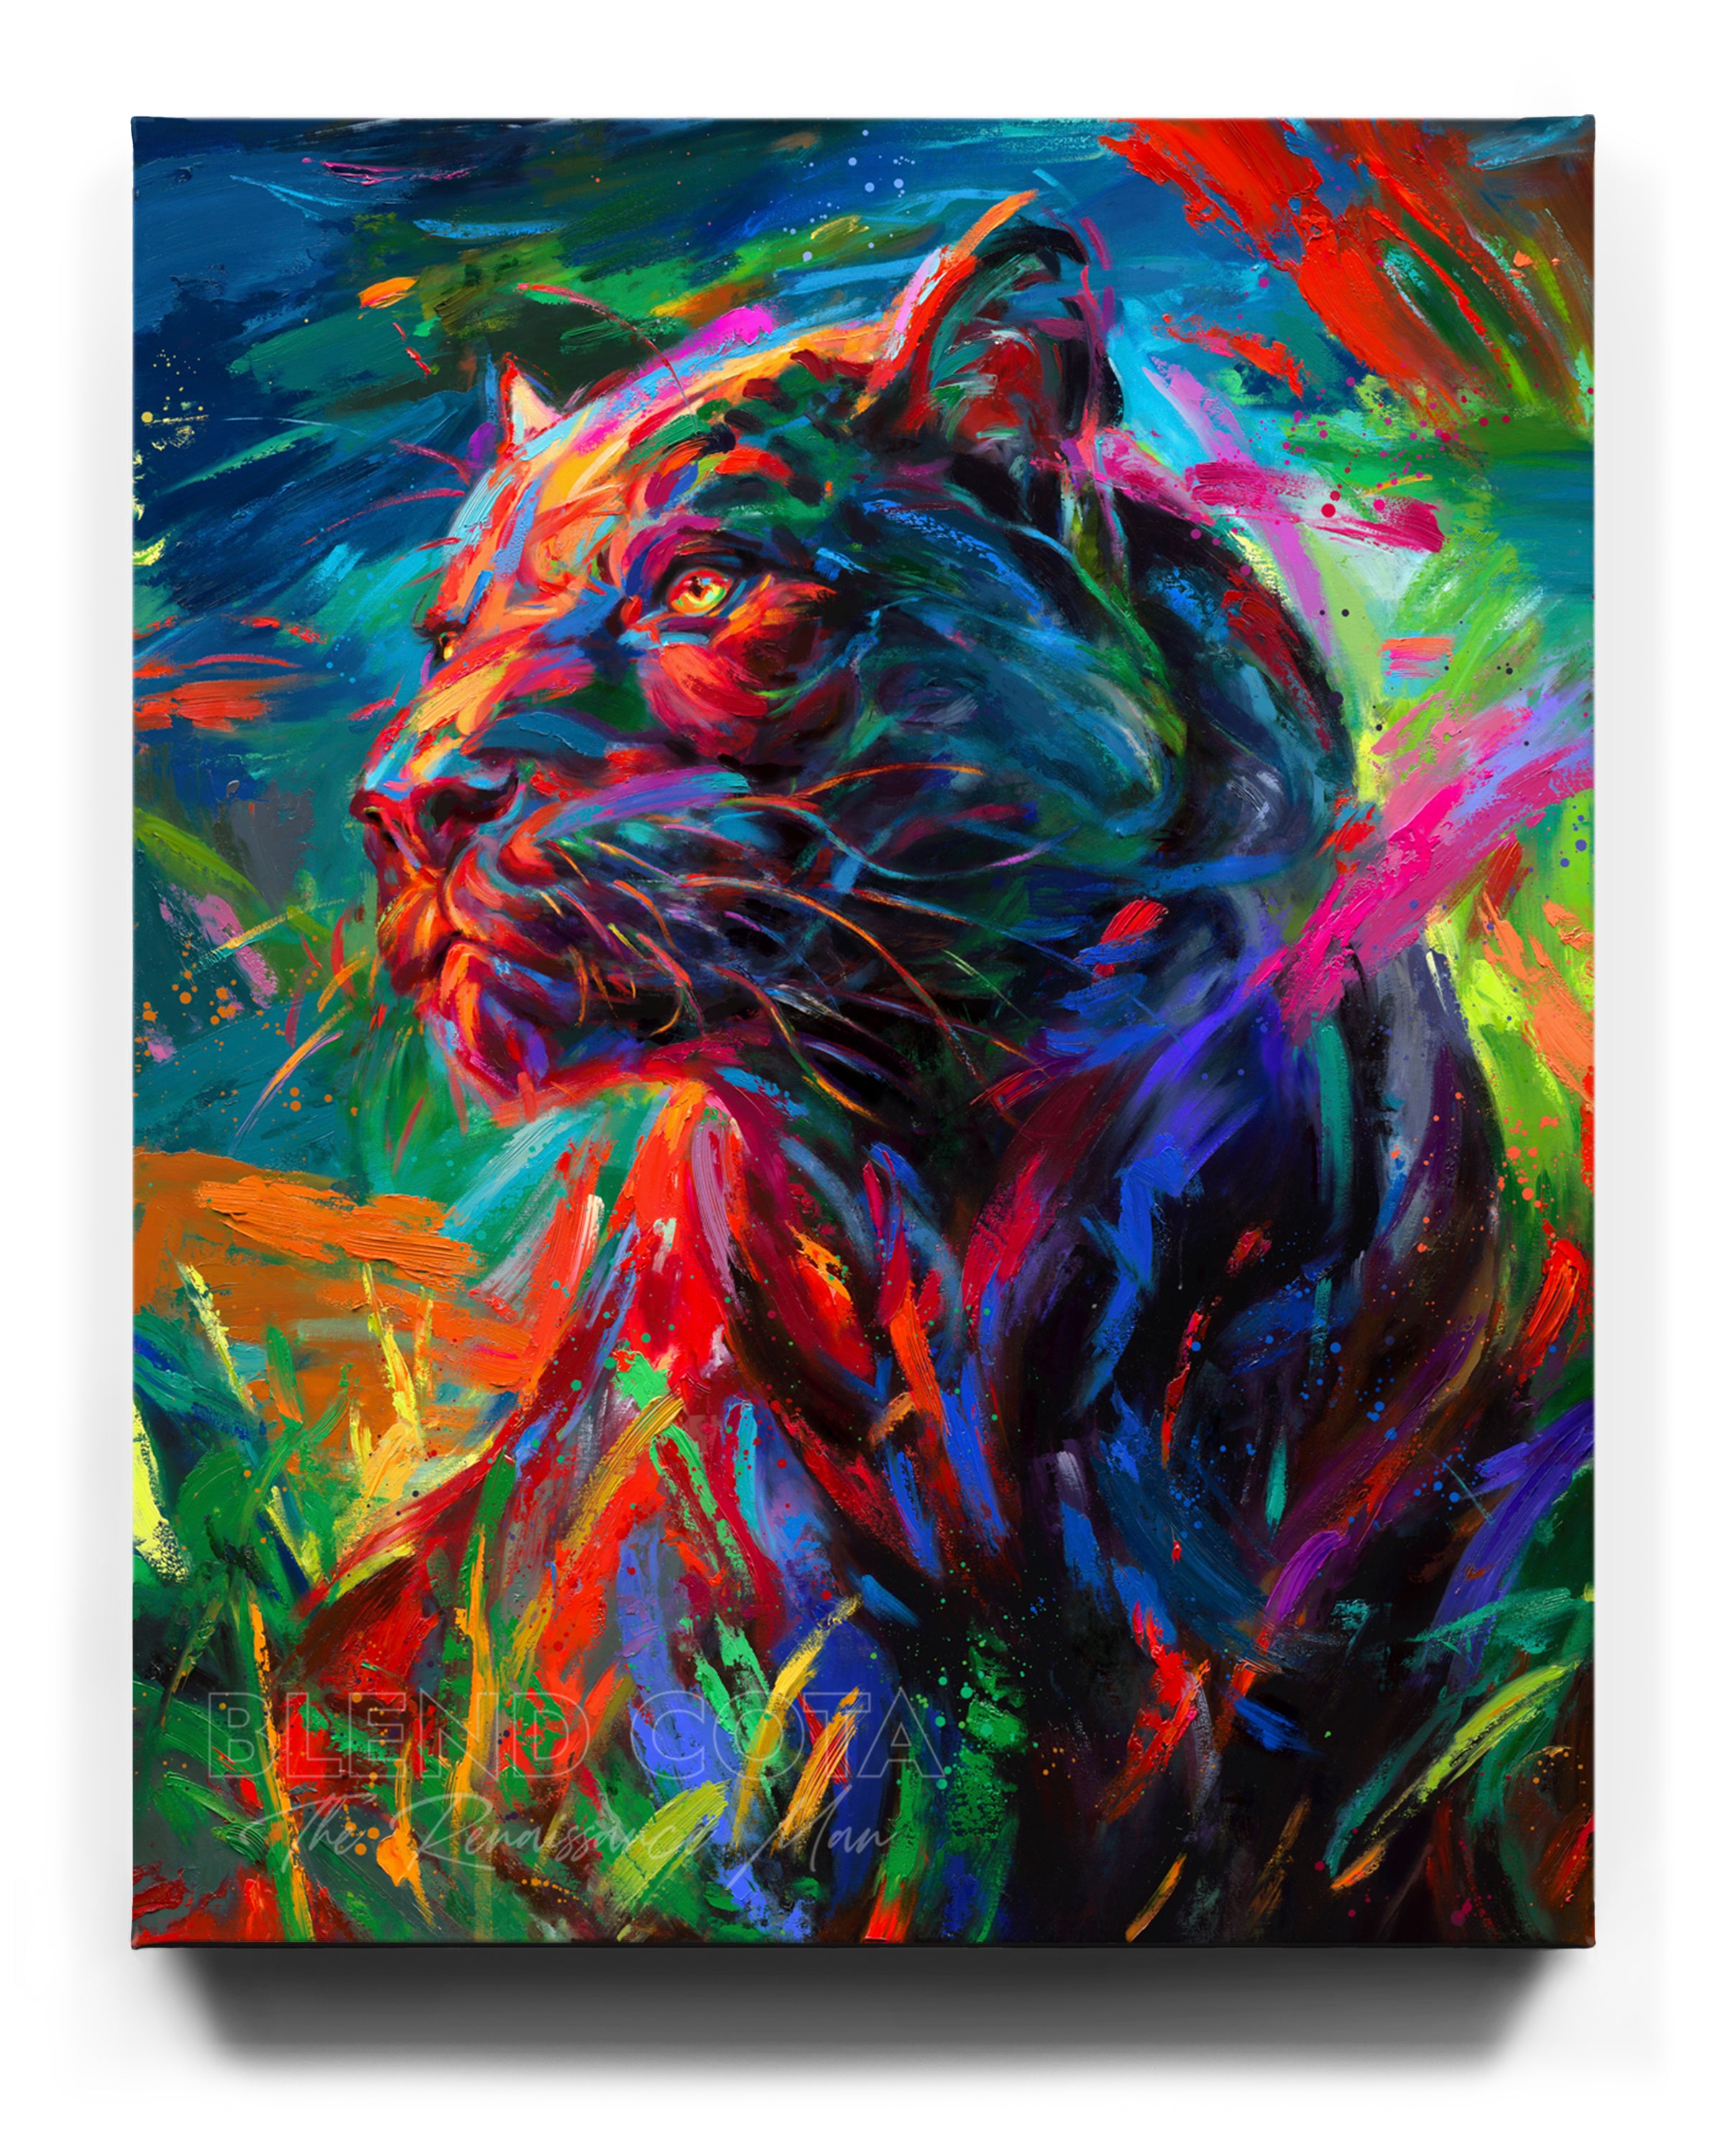 limited edition painting on canvas of the black panther stalking its prey through the long night painted with colorful brushstrokes in an expressionistic style.